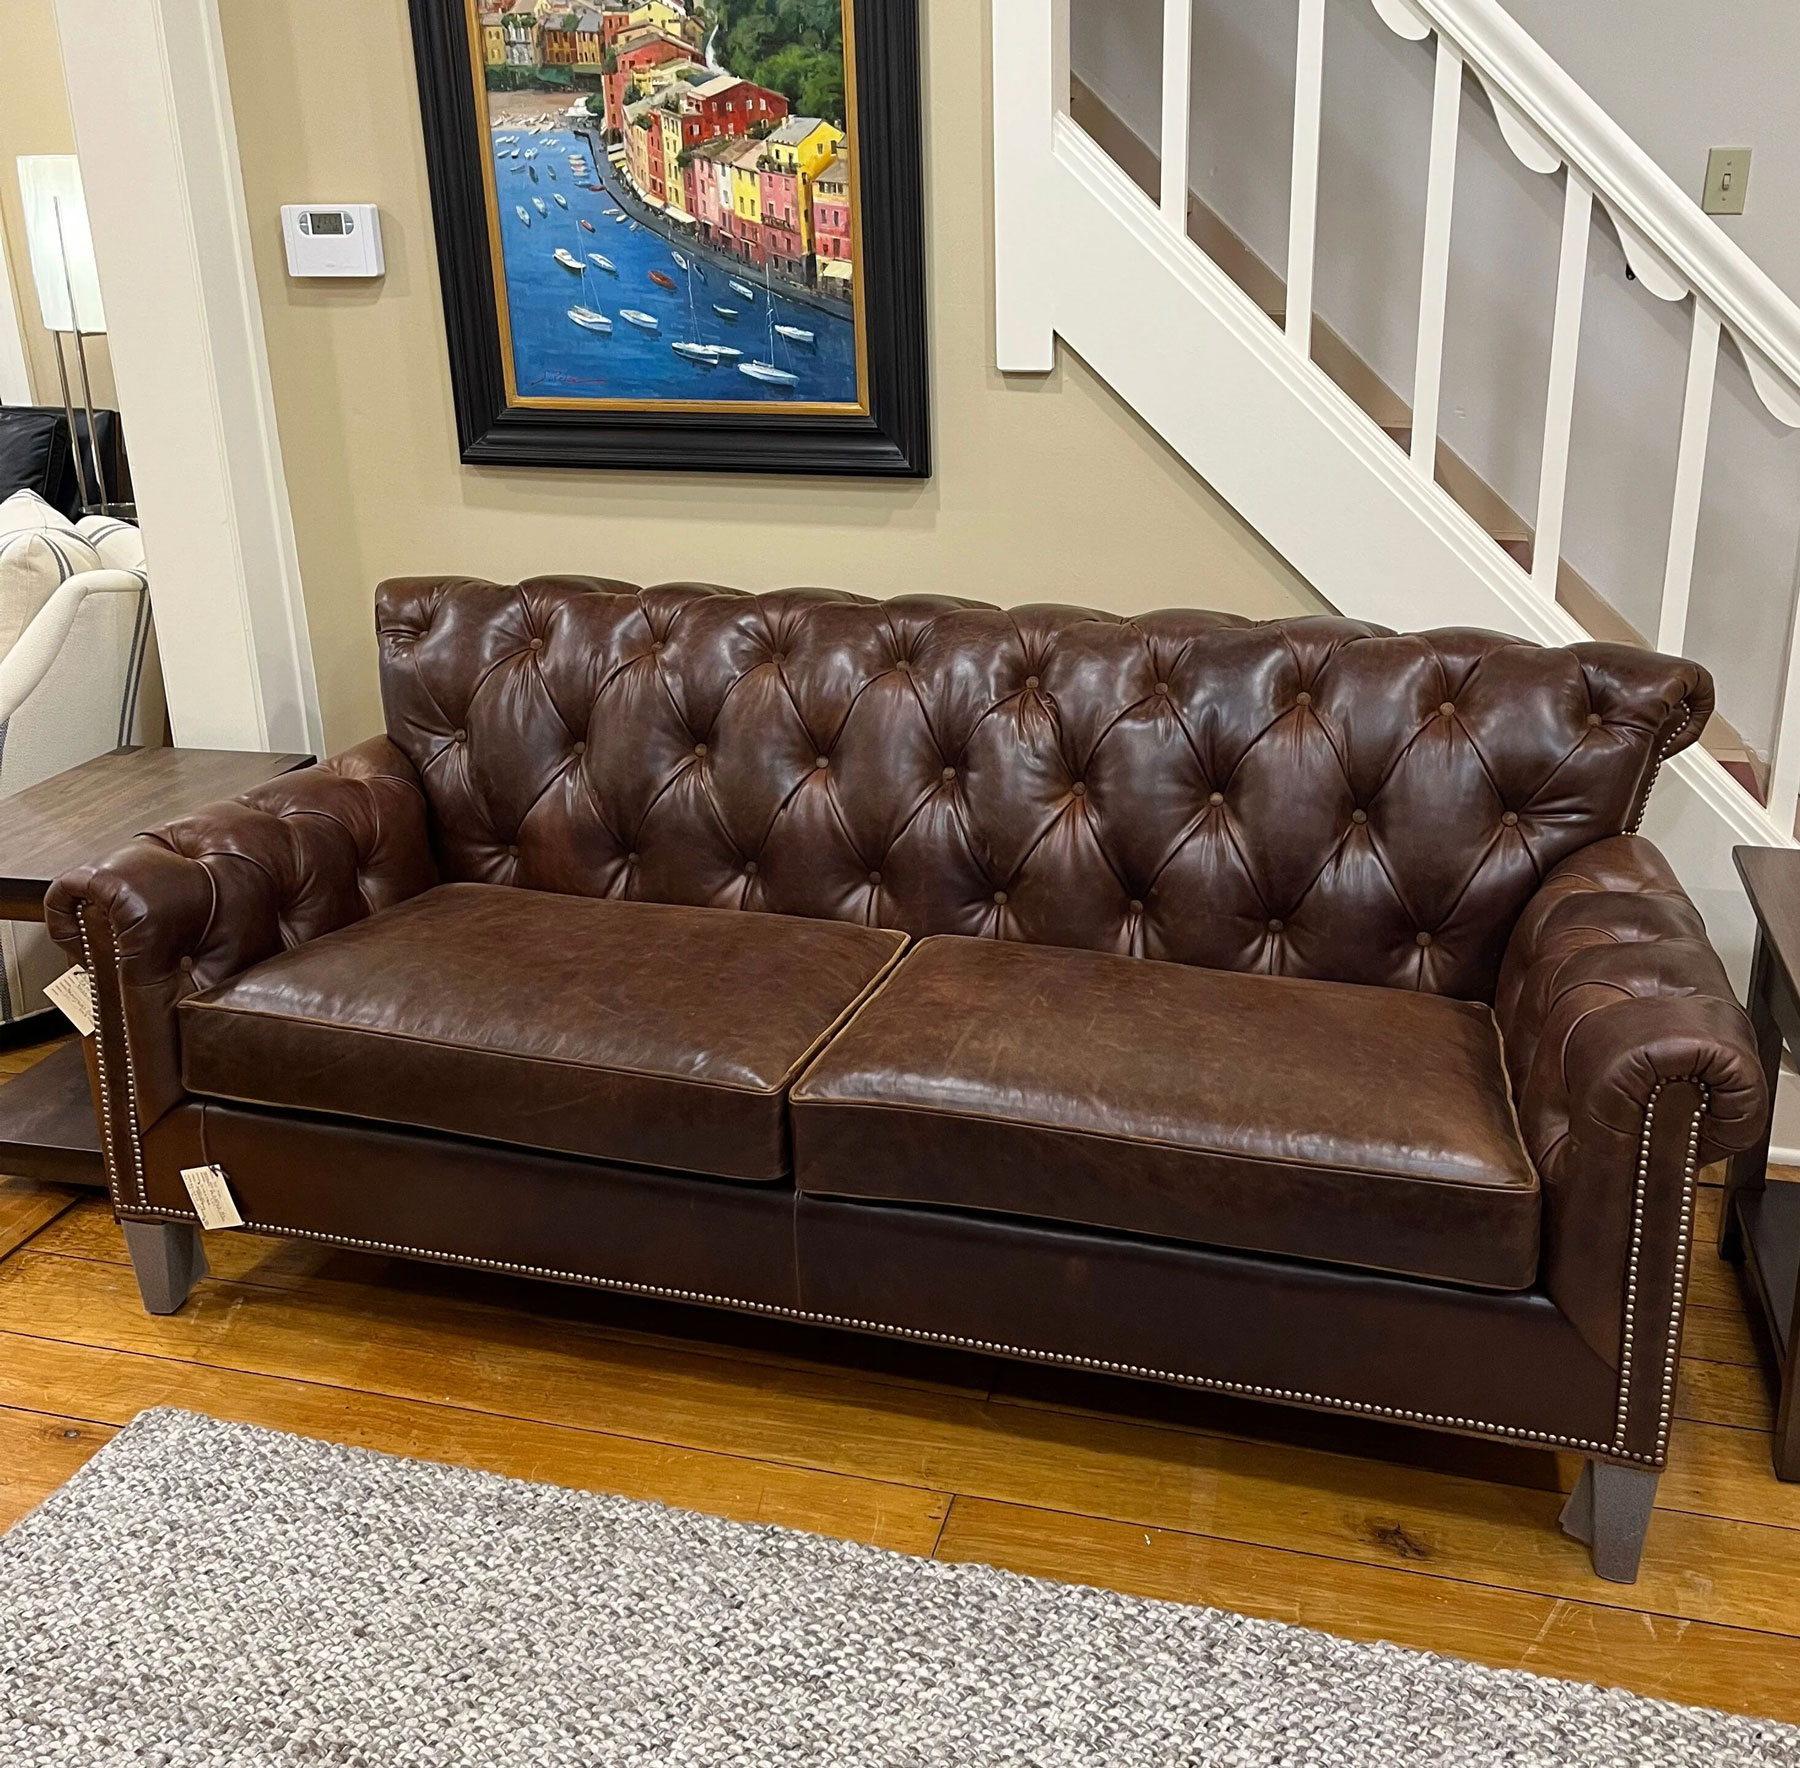 Wesley Hall L2512-84 Ivester Sofa in Frisco Molasses Leather